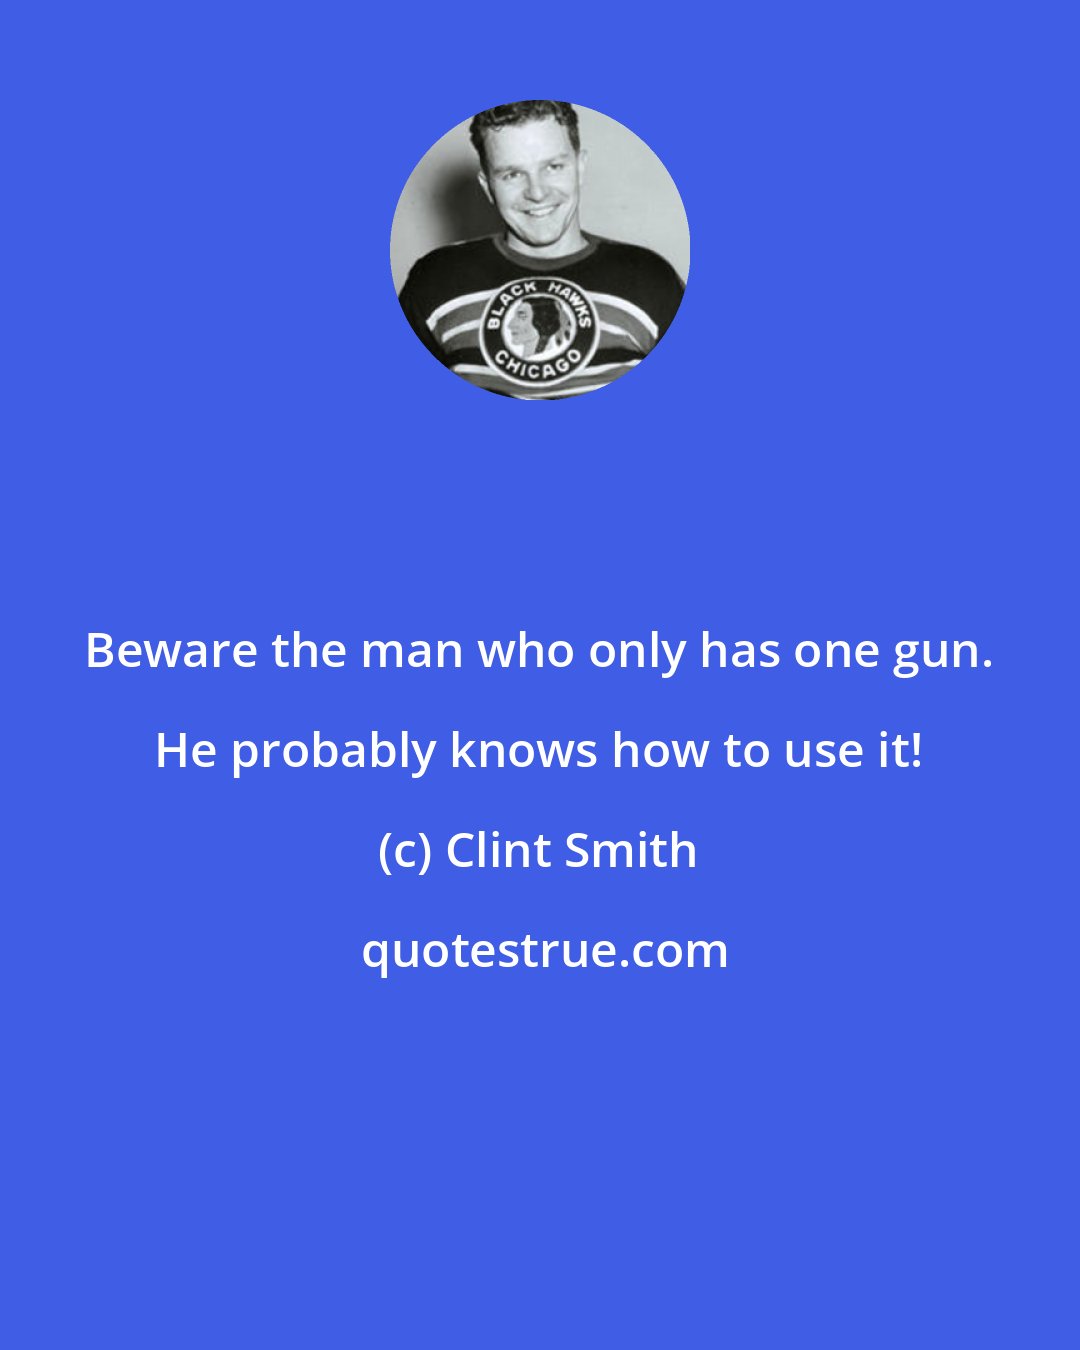 Clint Smith: Beware the man who only has one gun. He probably knows how to use it!